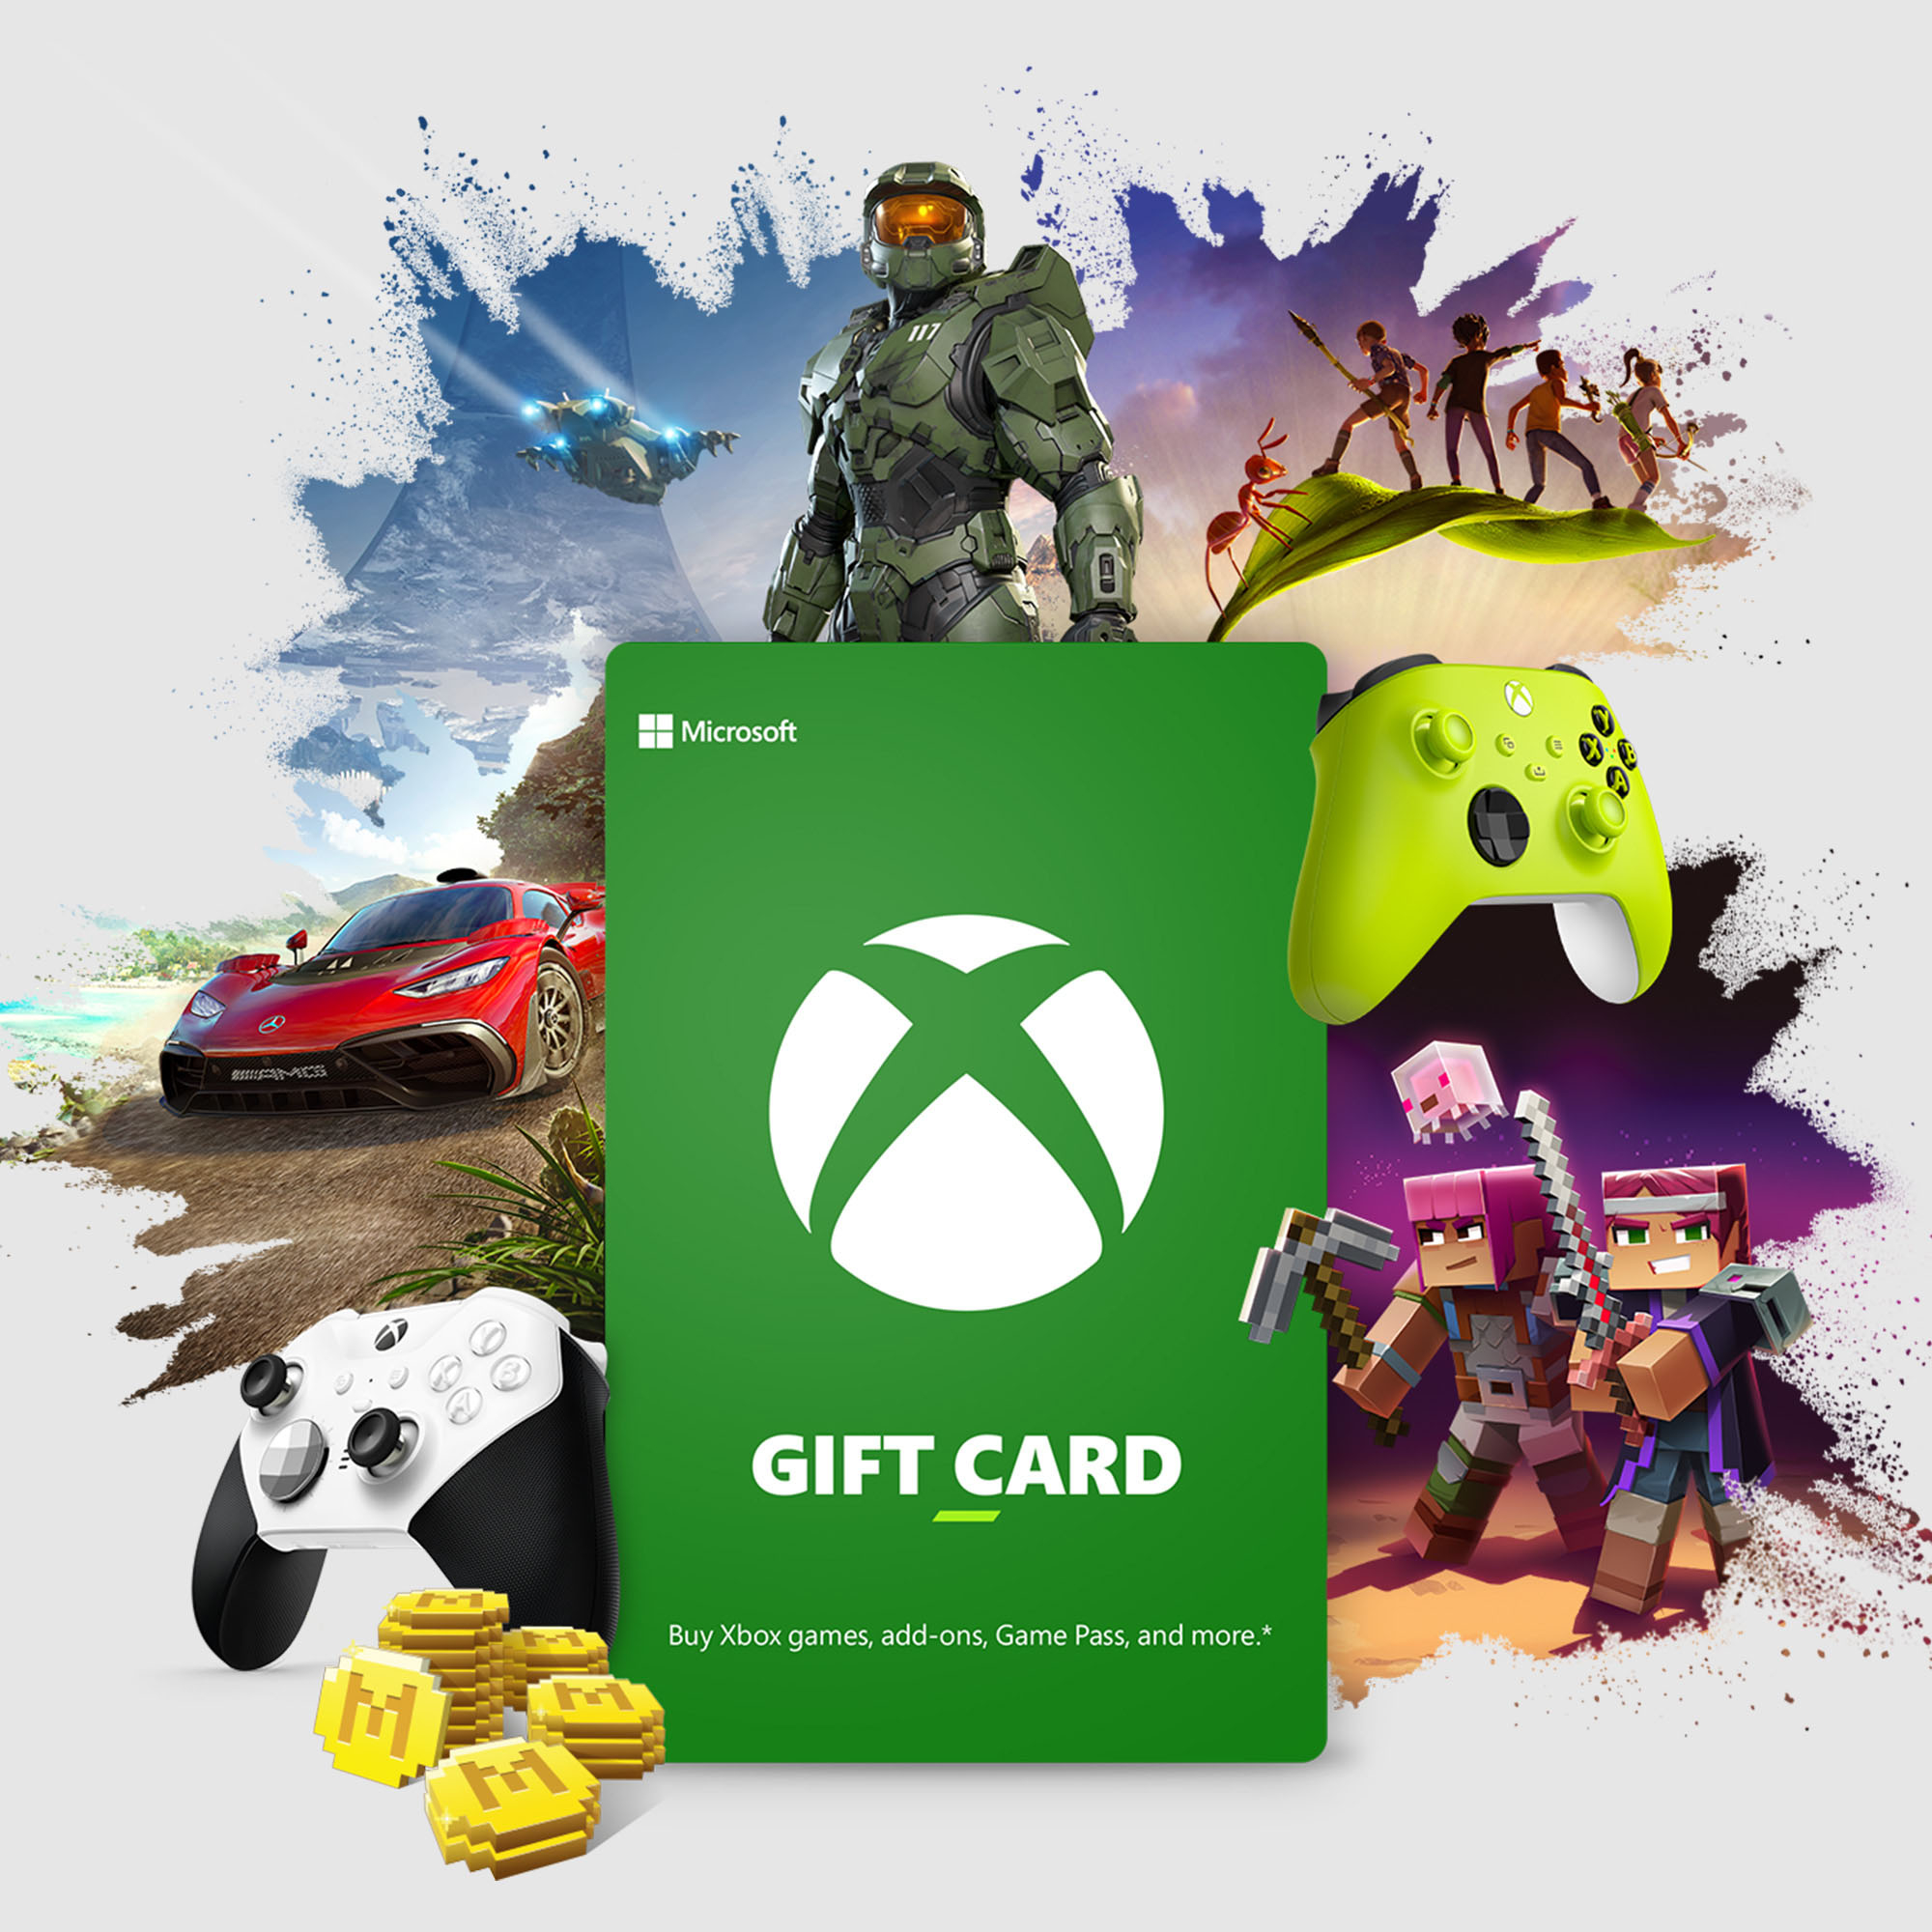 Xbox One Deal Gets You a Free Game and $50 Gift Code With Select